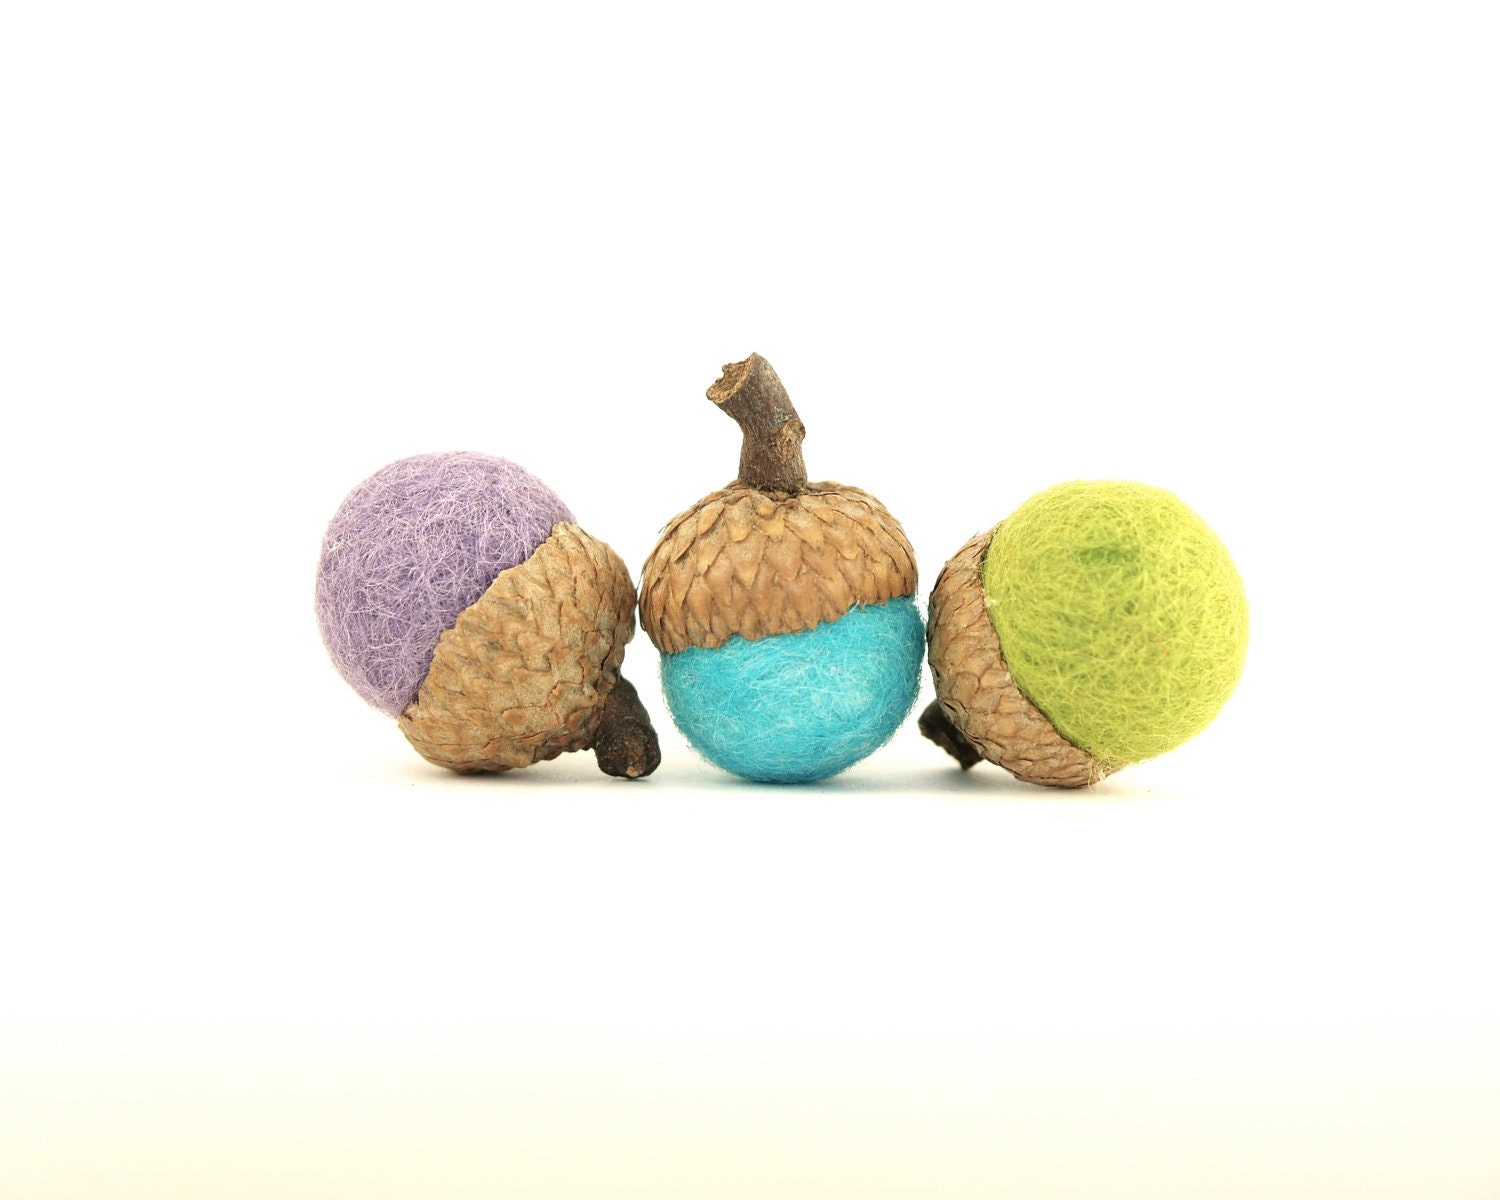 Felted Wool Acorns, Colorful Autumn and Fall Home Decorating, Lavender Purple, Turquoise Blue and Lime Green - set of 9 - Fairyfolk